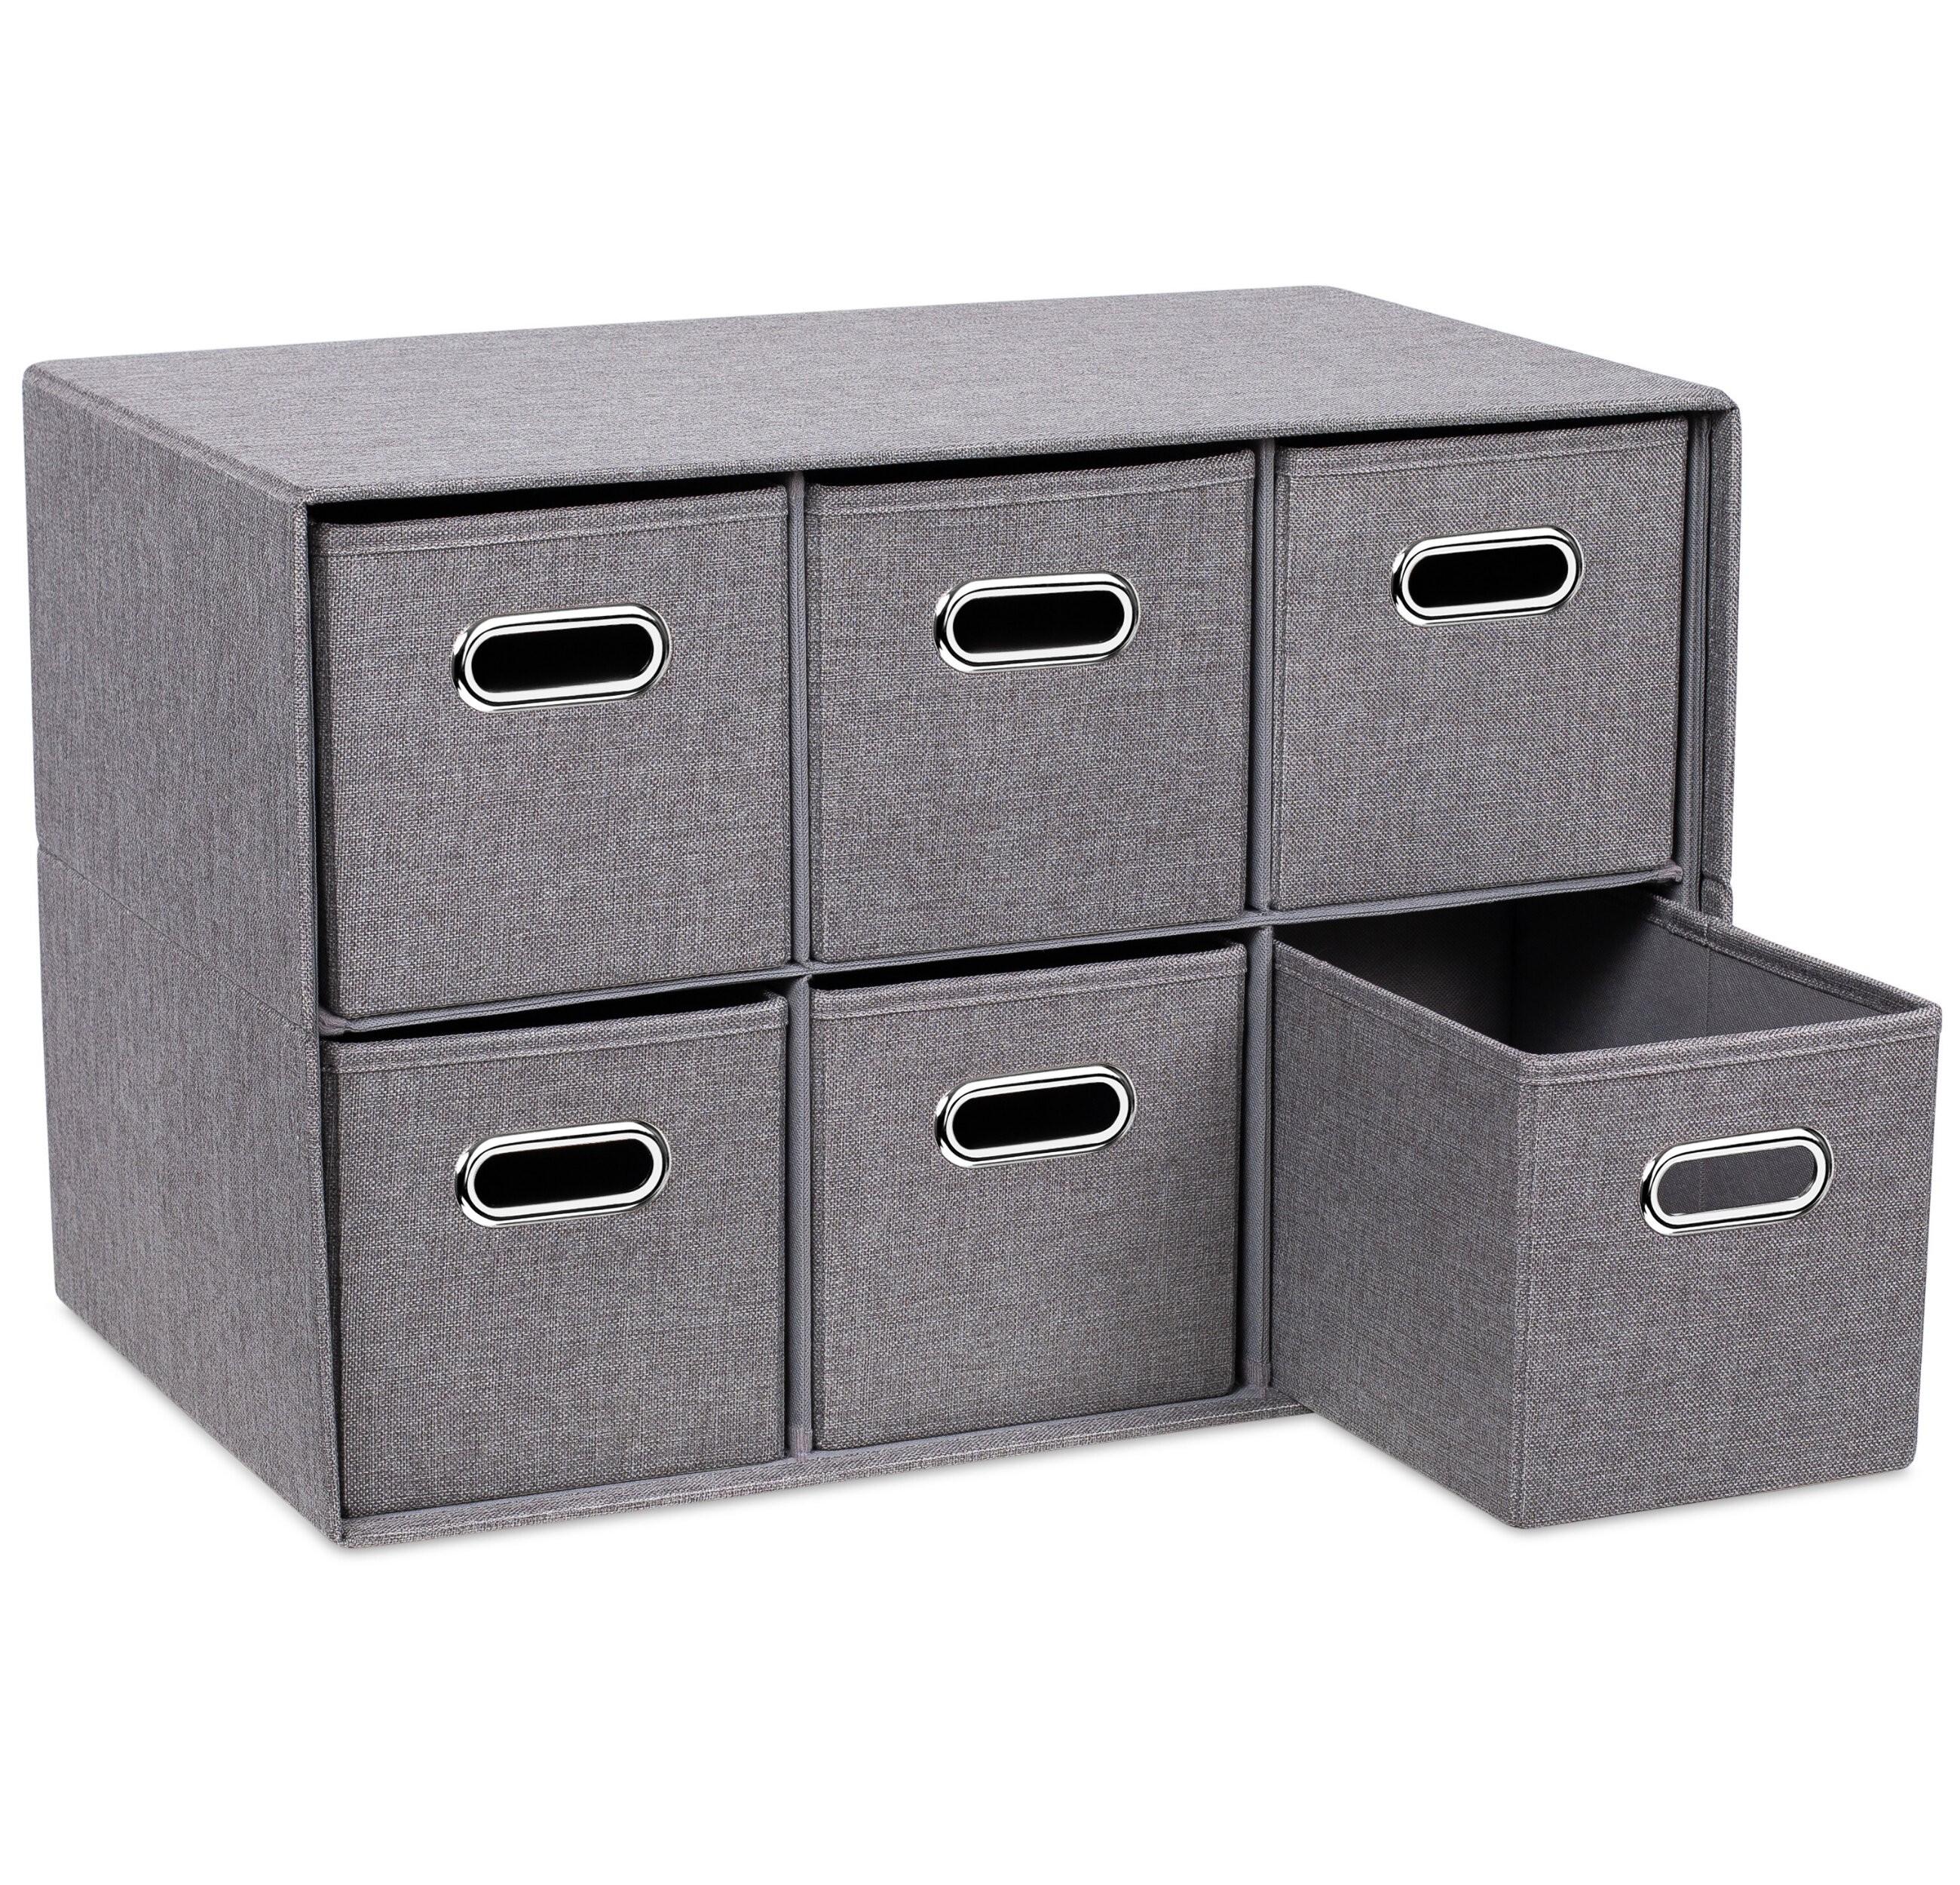 Storage Container with Handle Collapsible Storage Cubes in Black Storage Cube Organizer 4 Pack Closet Organizers Bedroom Storage Drawers 